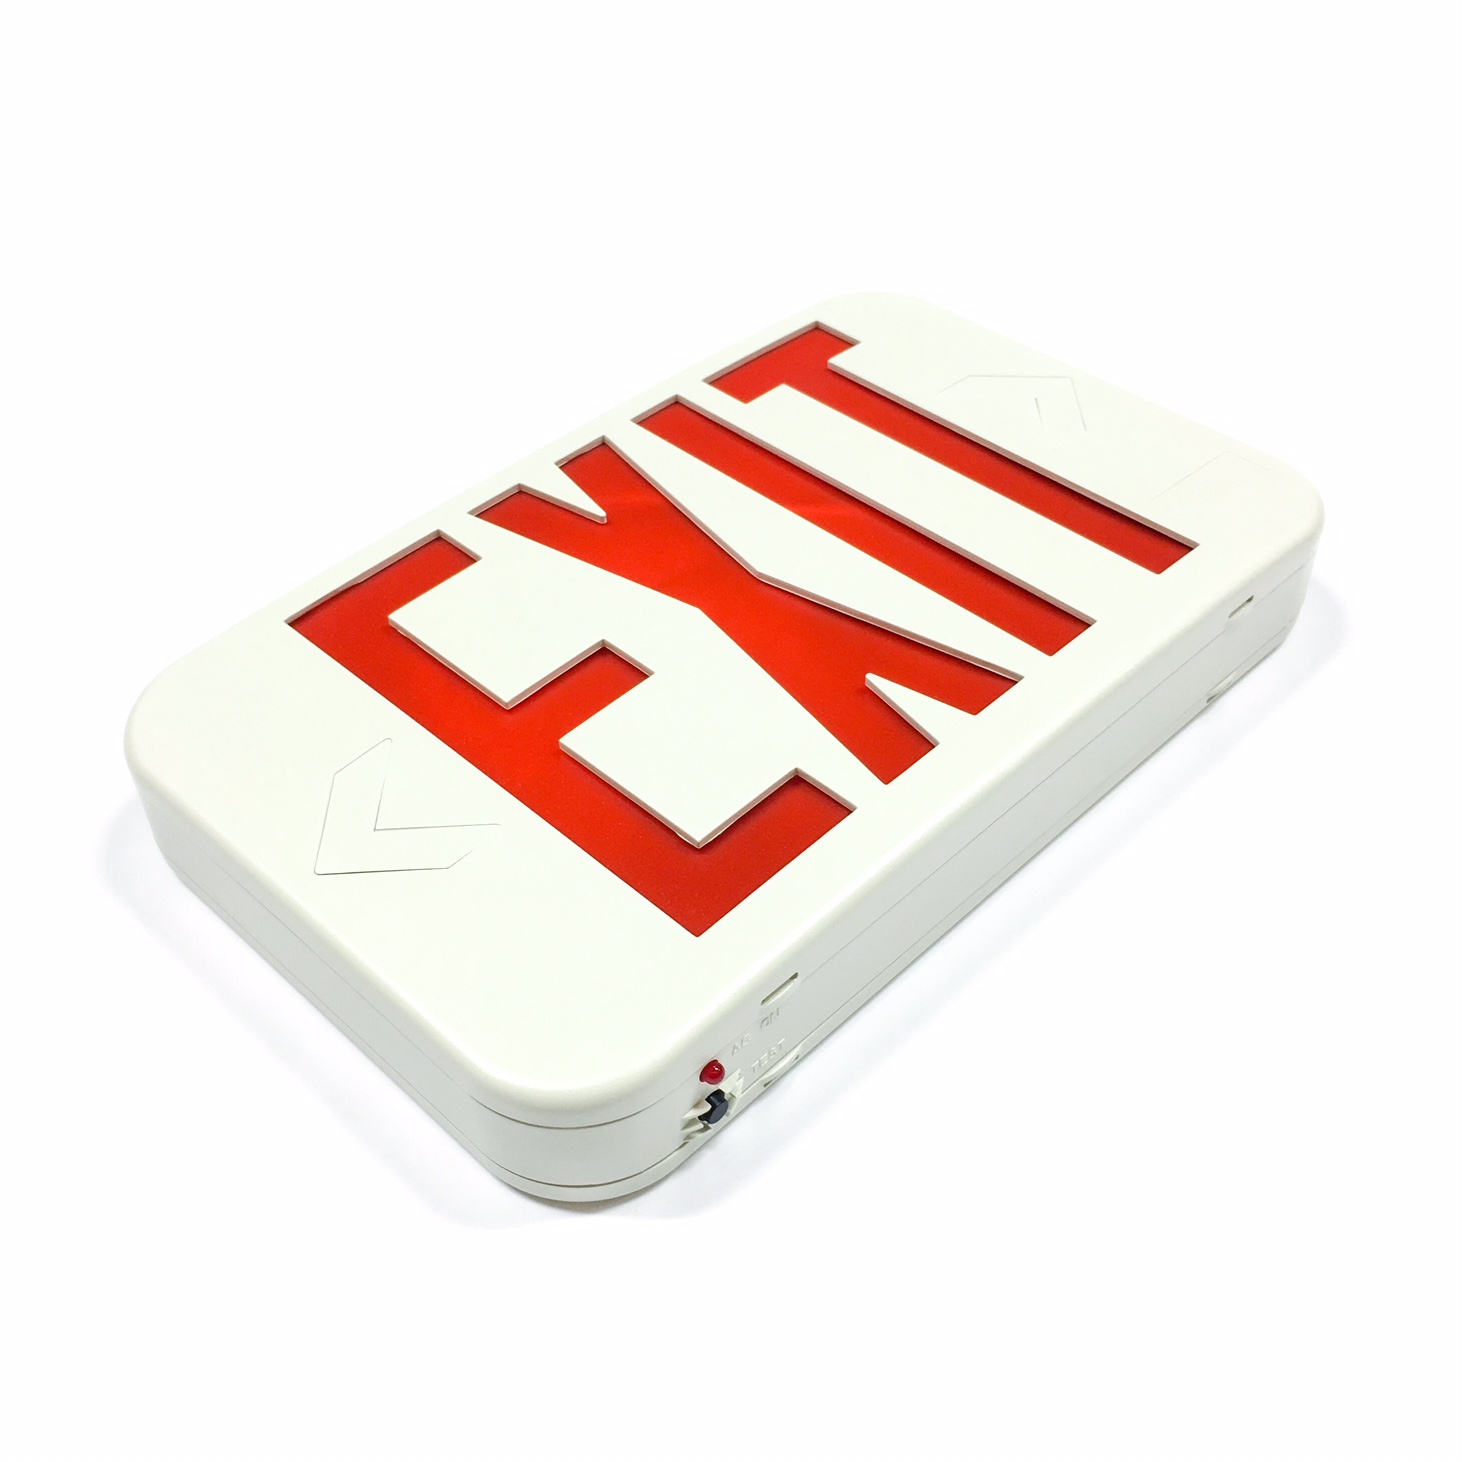 Lithonia Lighting 210lan LED Red Thermoplastic Exit Sign for sale online